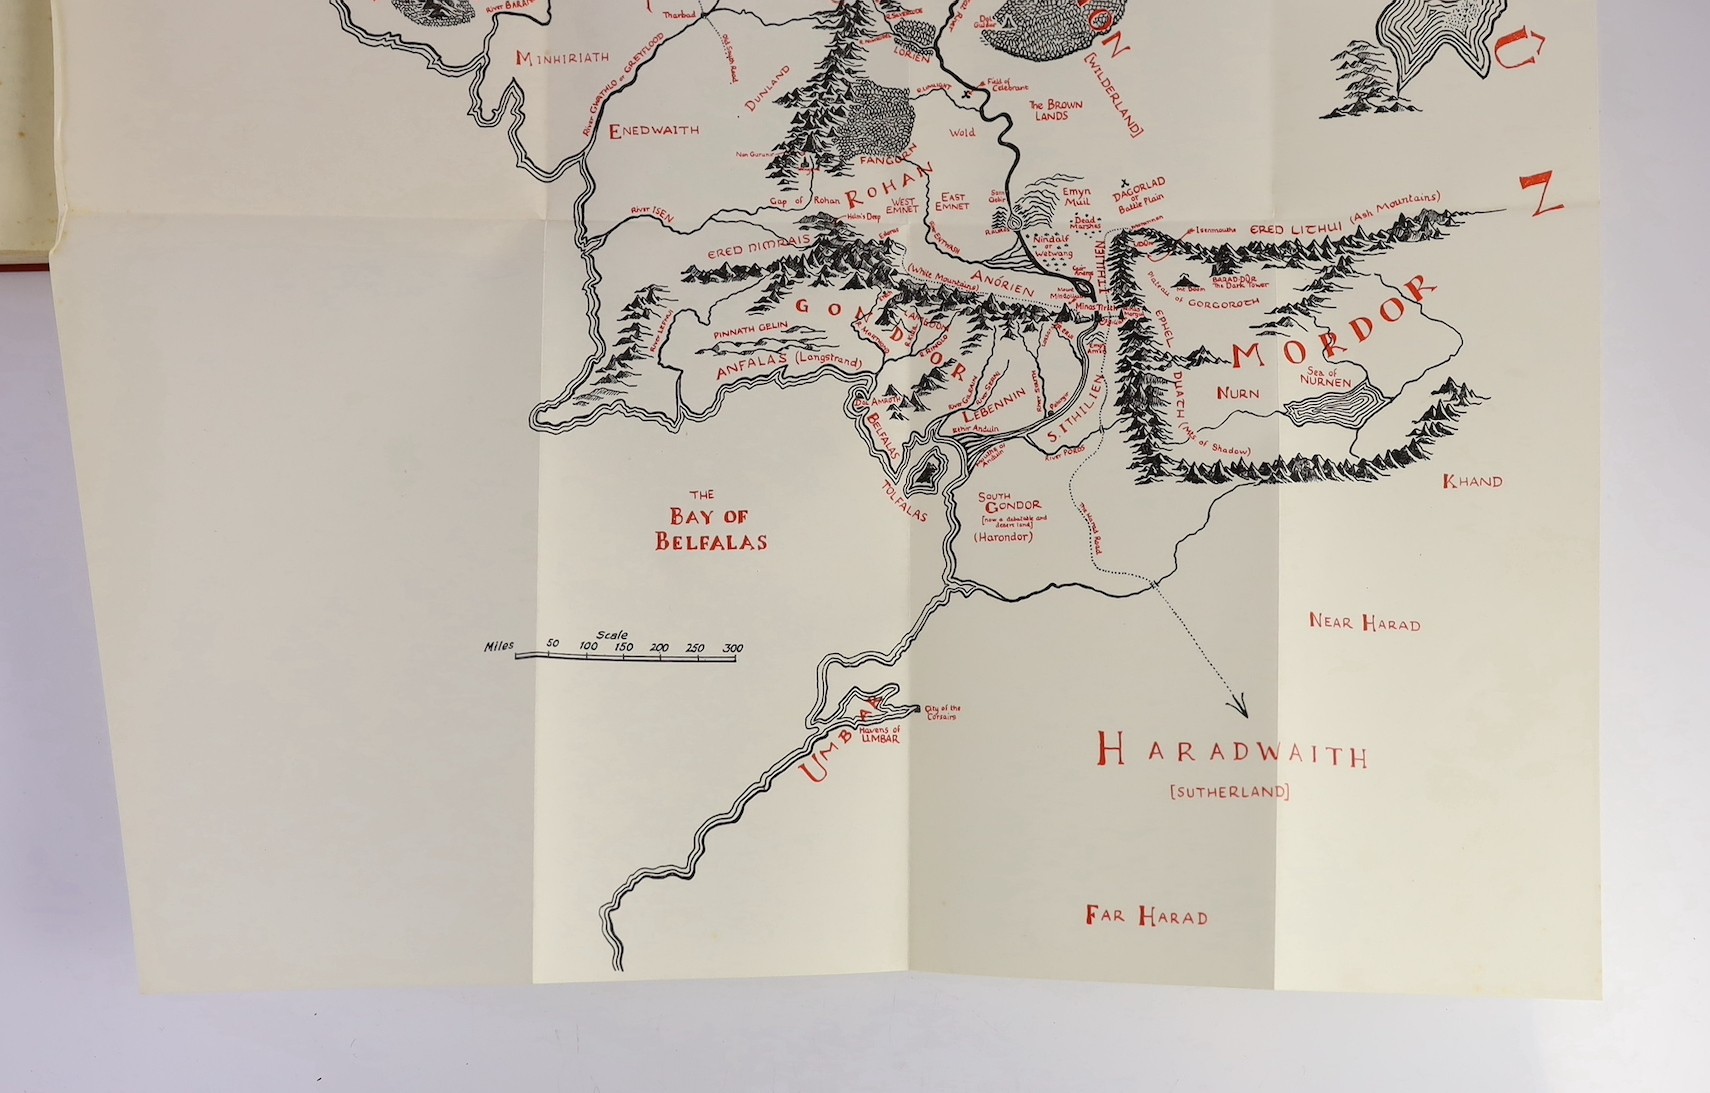 Tolkein, John Ronald Reuel - The Lord of the Rings trilogy